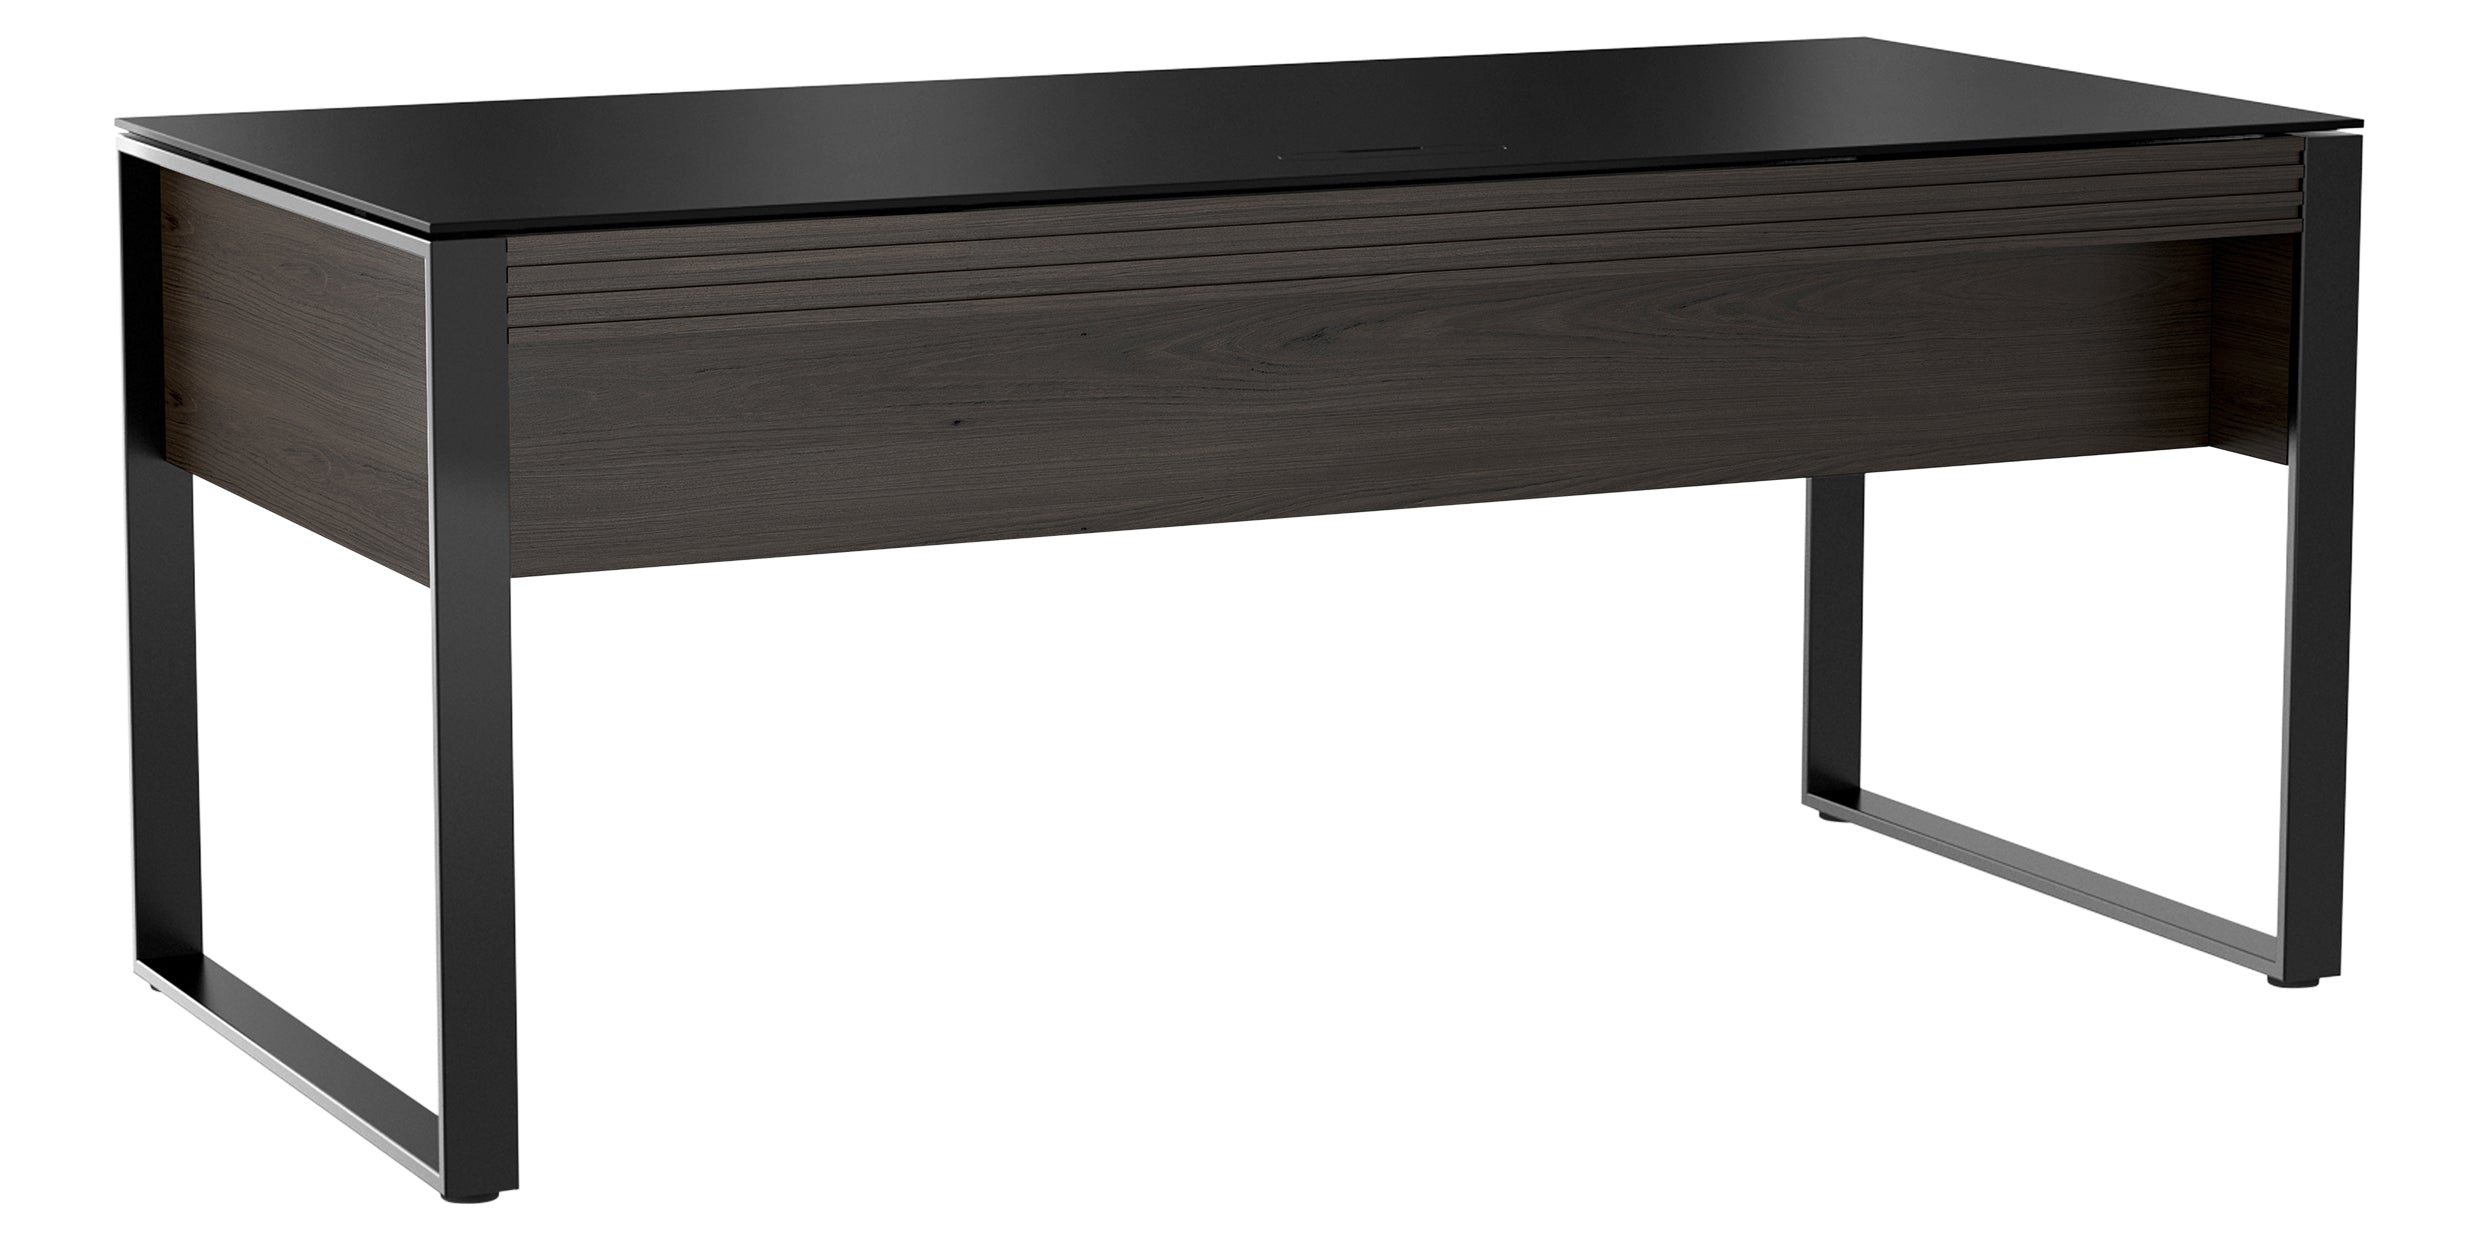 Charcoal Stained Ash &amp; Charcoal Ash Veneer with Black Satin-Etched Glass &amp; Black Steel | BDI Corridor Desk | Valley Ridge Furniture